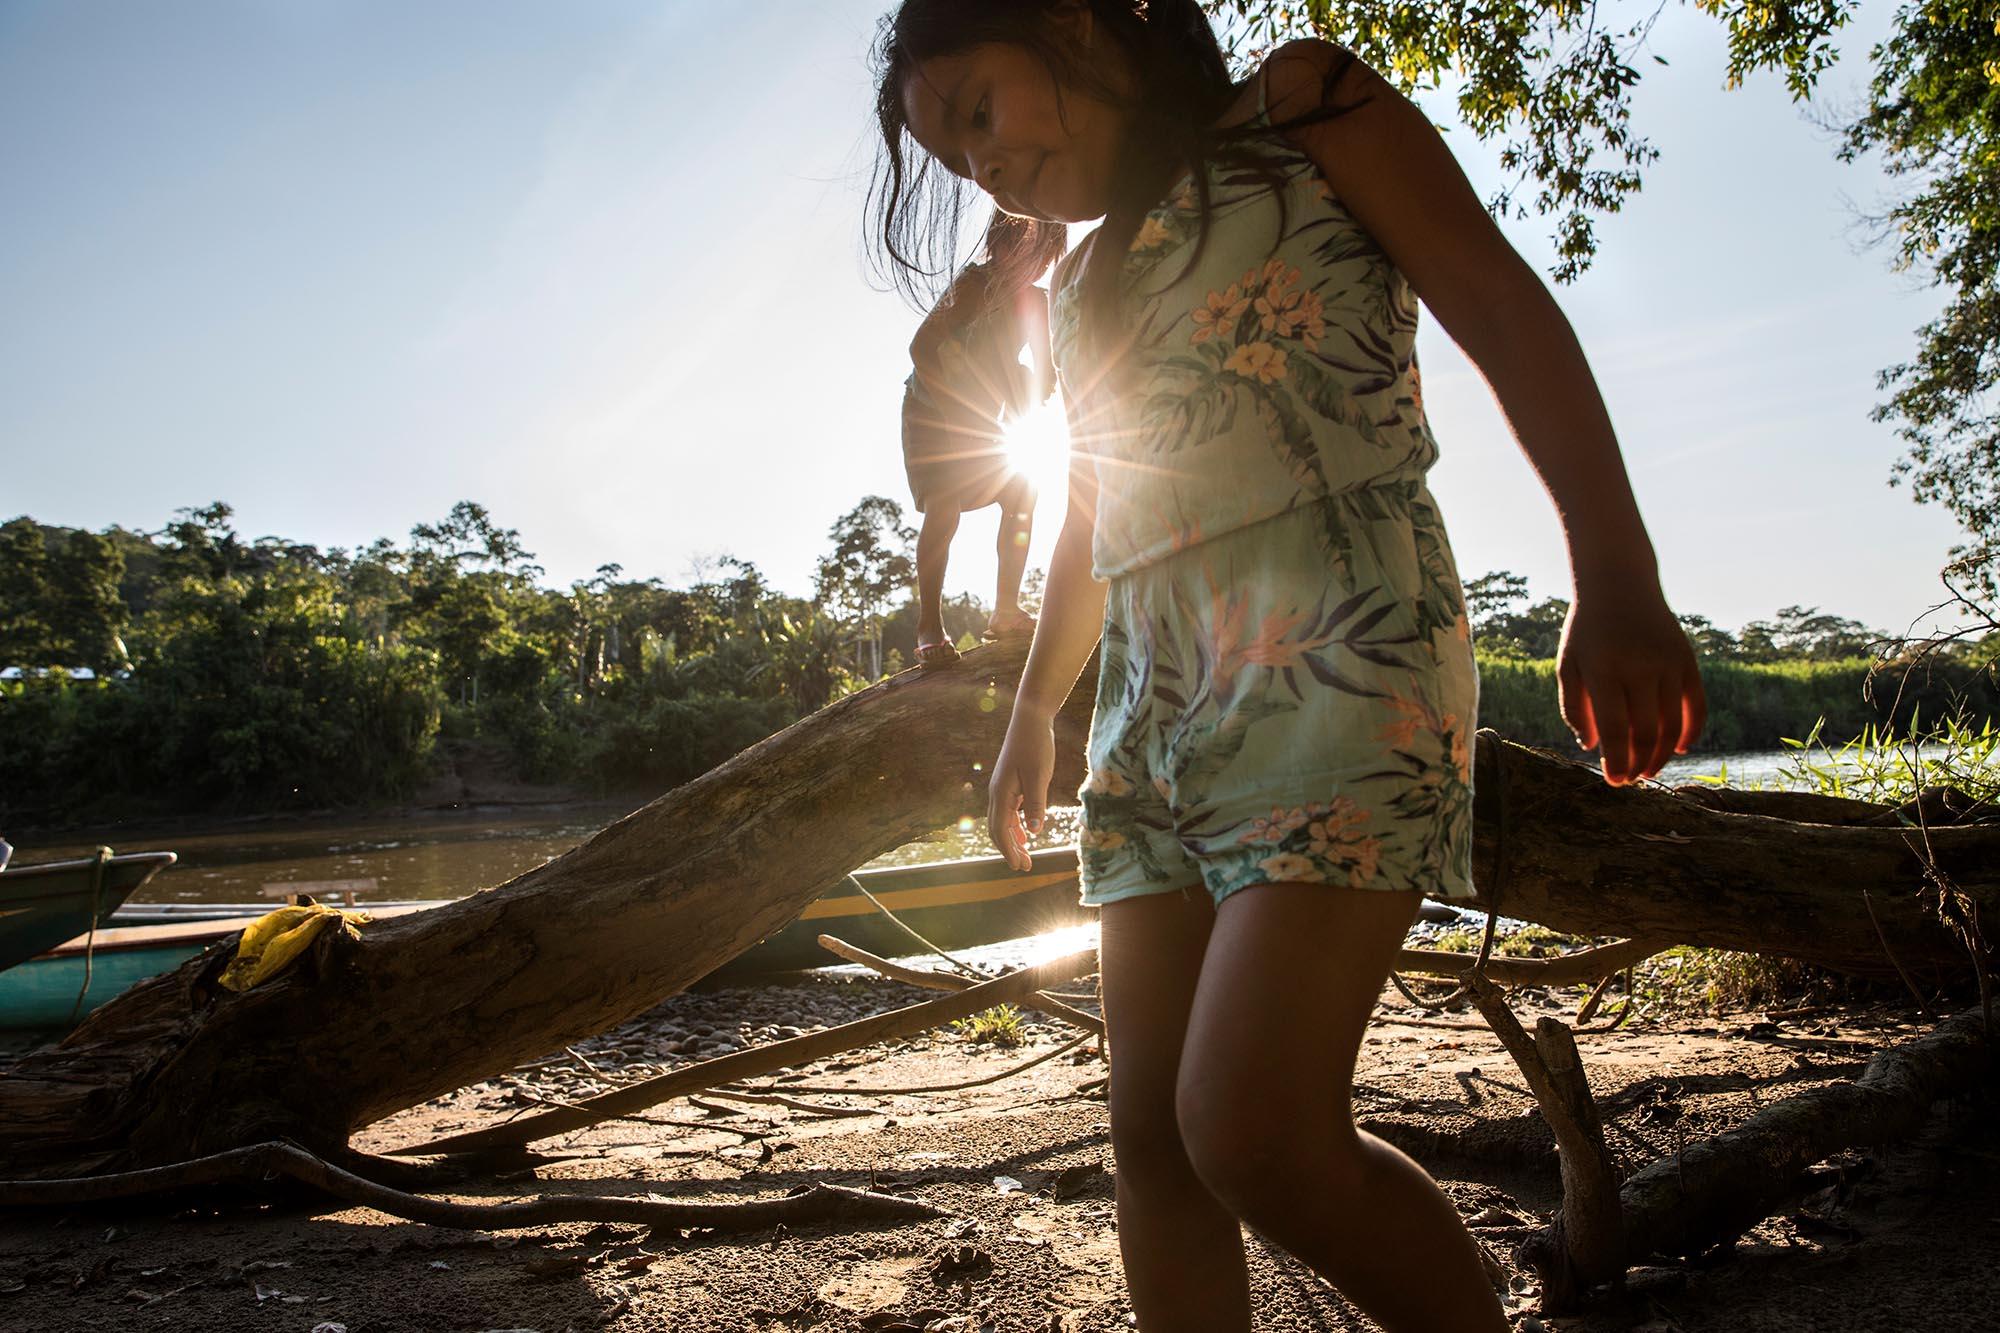 Ecuador, the living forest - Walkanga and jade are playing by the water. Children...